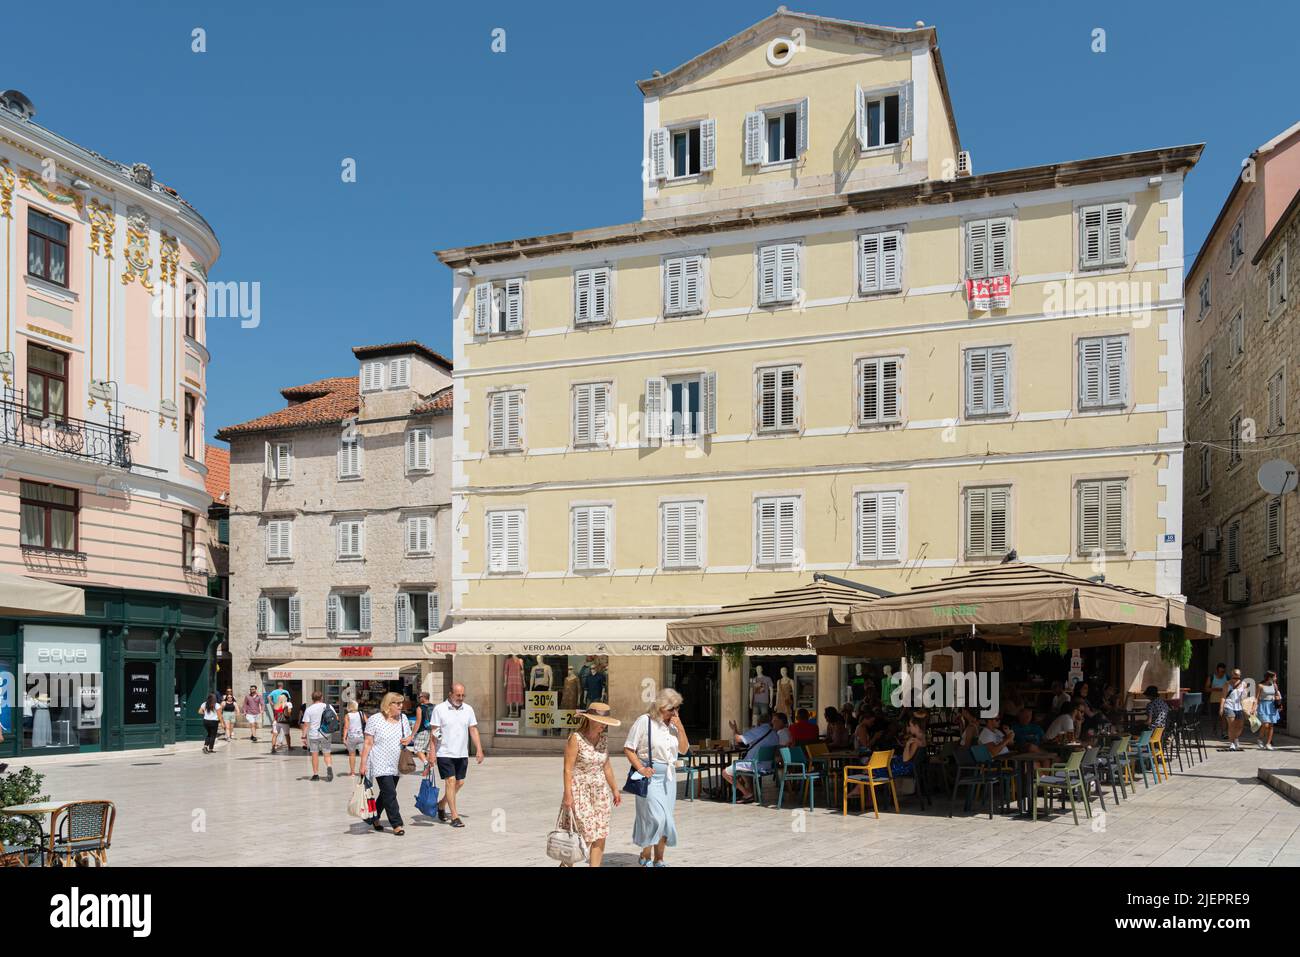 SPLIT, CROATIA - JULY 30, 2021: Busy Streets Of Downtown Old Center Of Split City, People On Some Of The Most Important Landmark Avenues And Streets Stock Photo